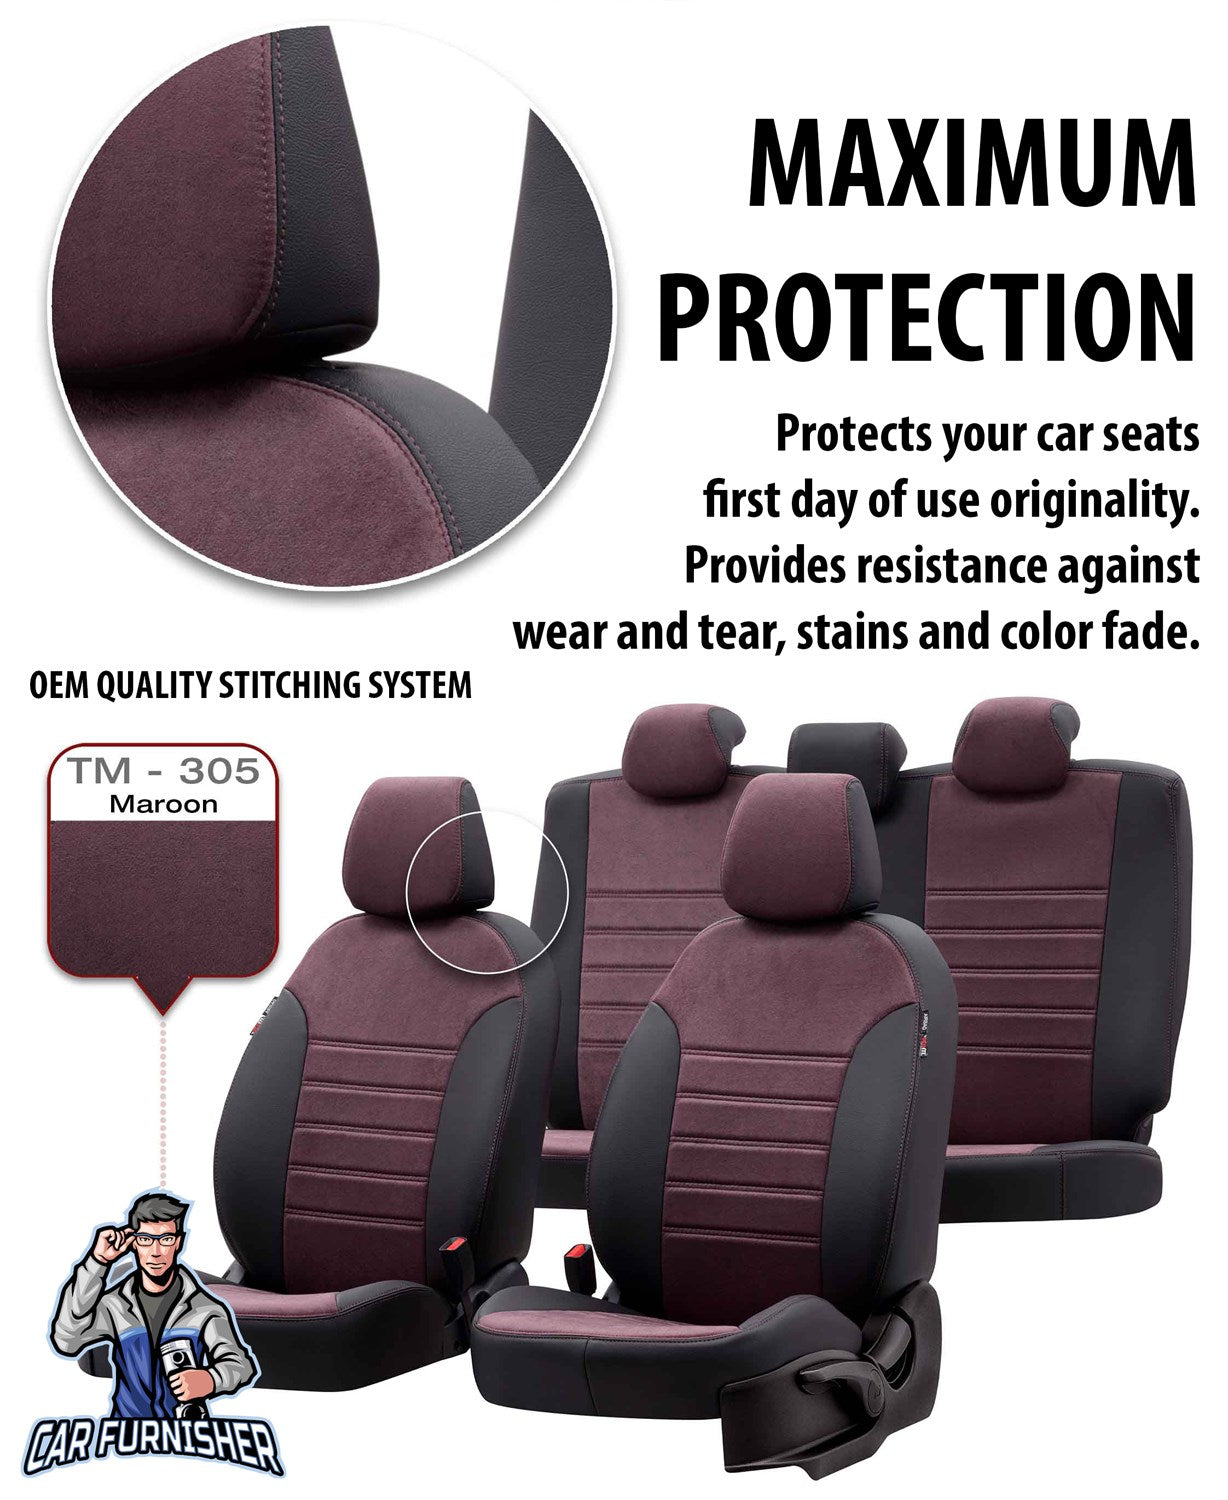 Isuzu D-Max Seat Covers Milano Suede Design Ivory Leather & Suede Fabric